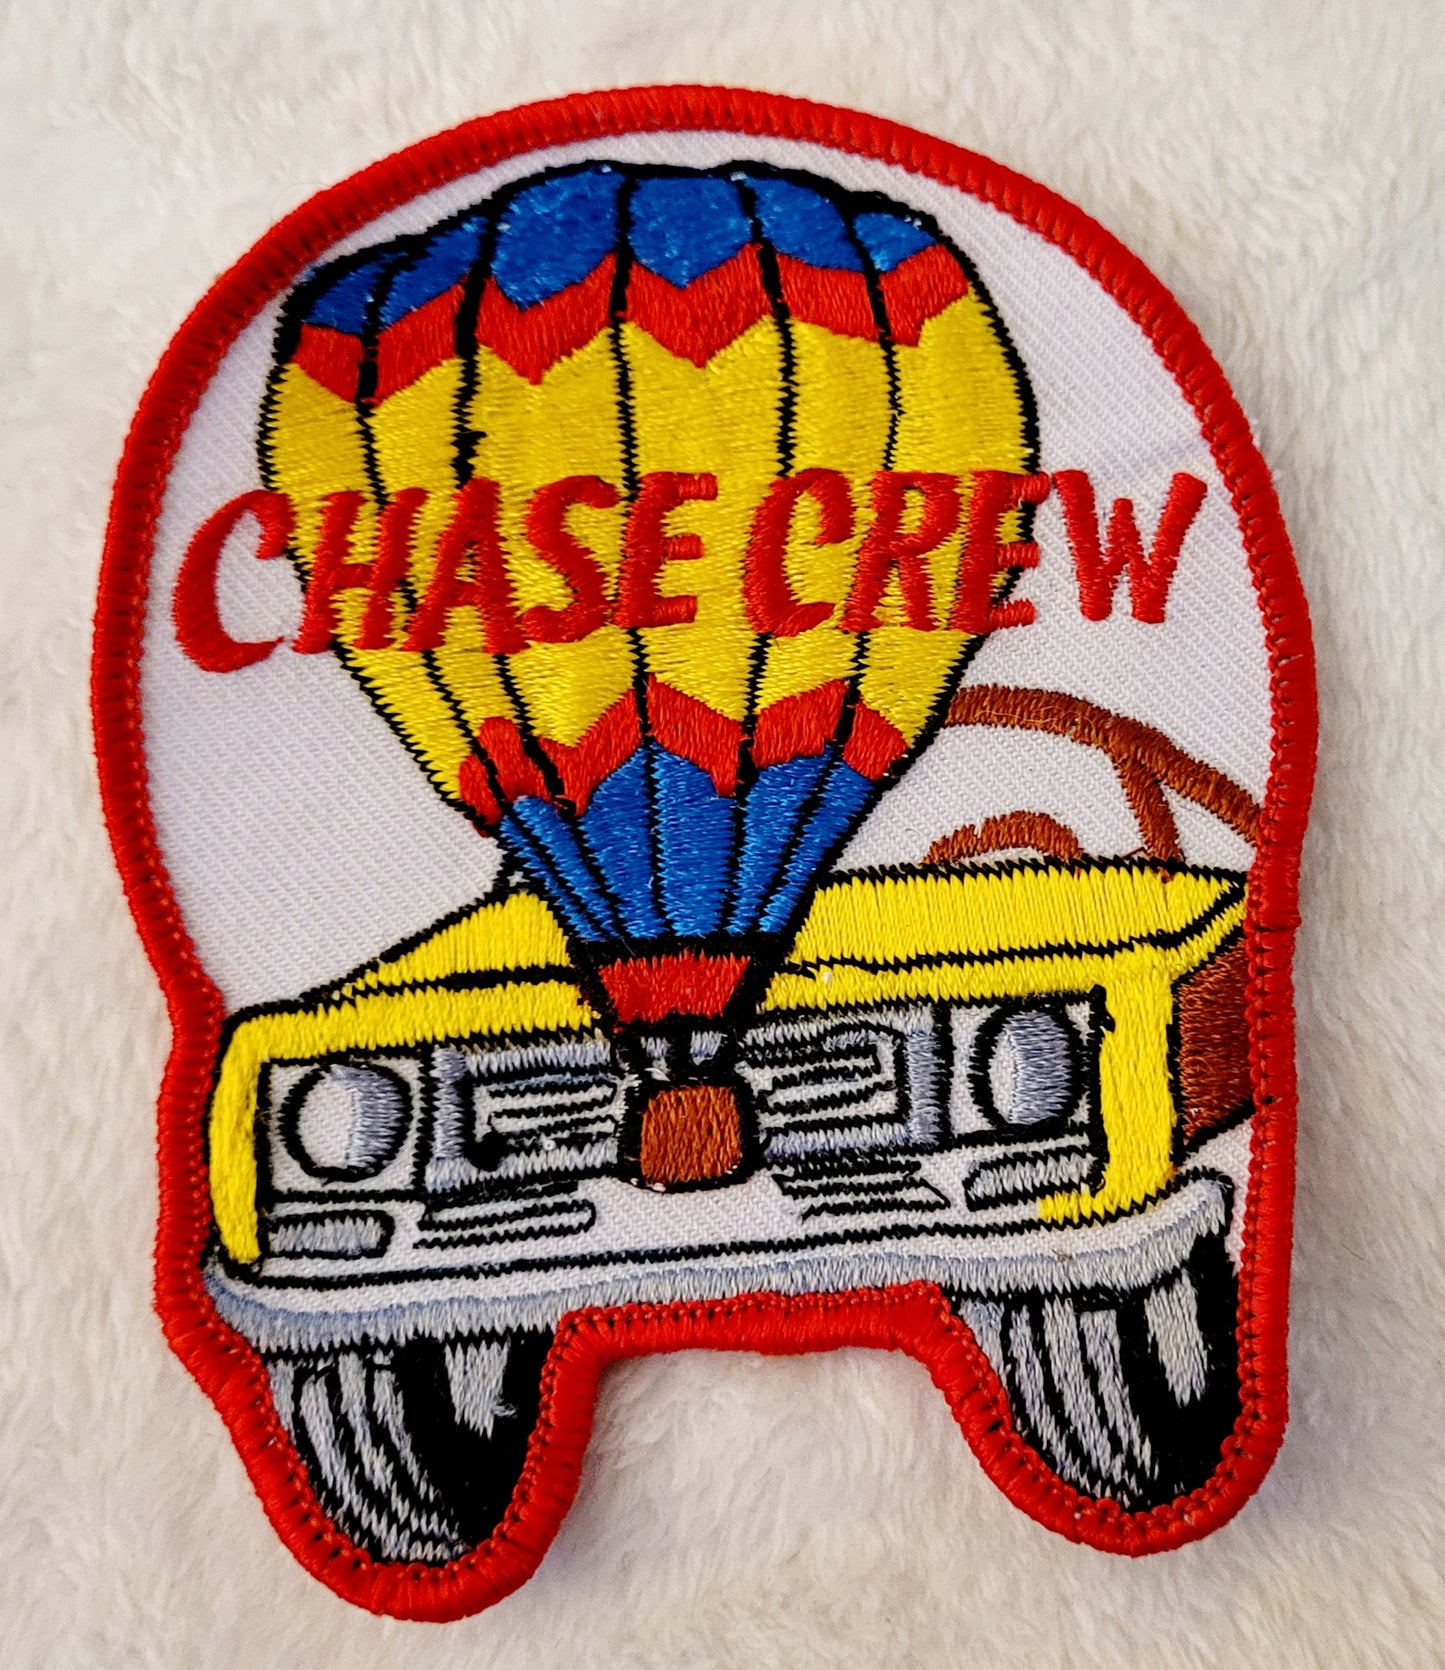 Colorful "Chase Crew" *Hot Air Balloon Patch